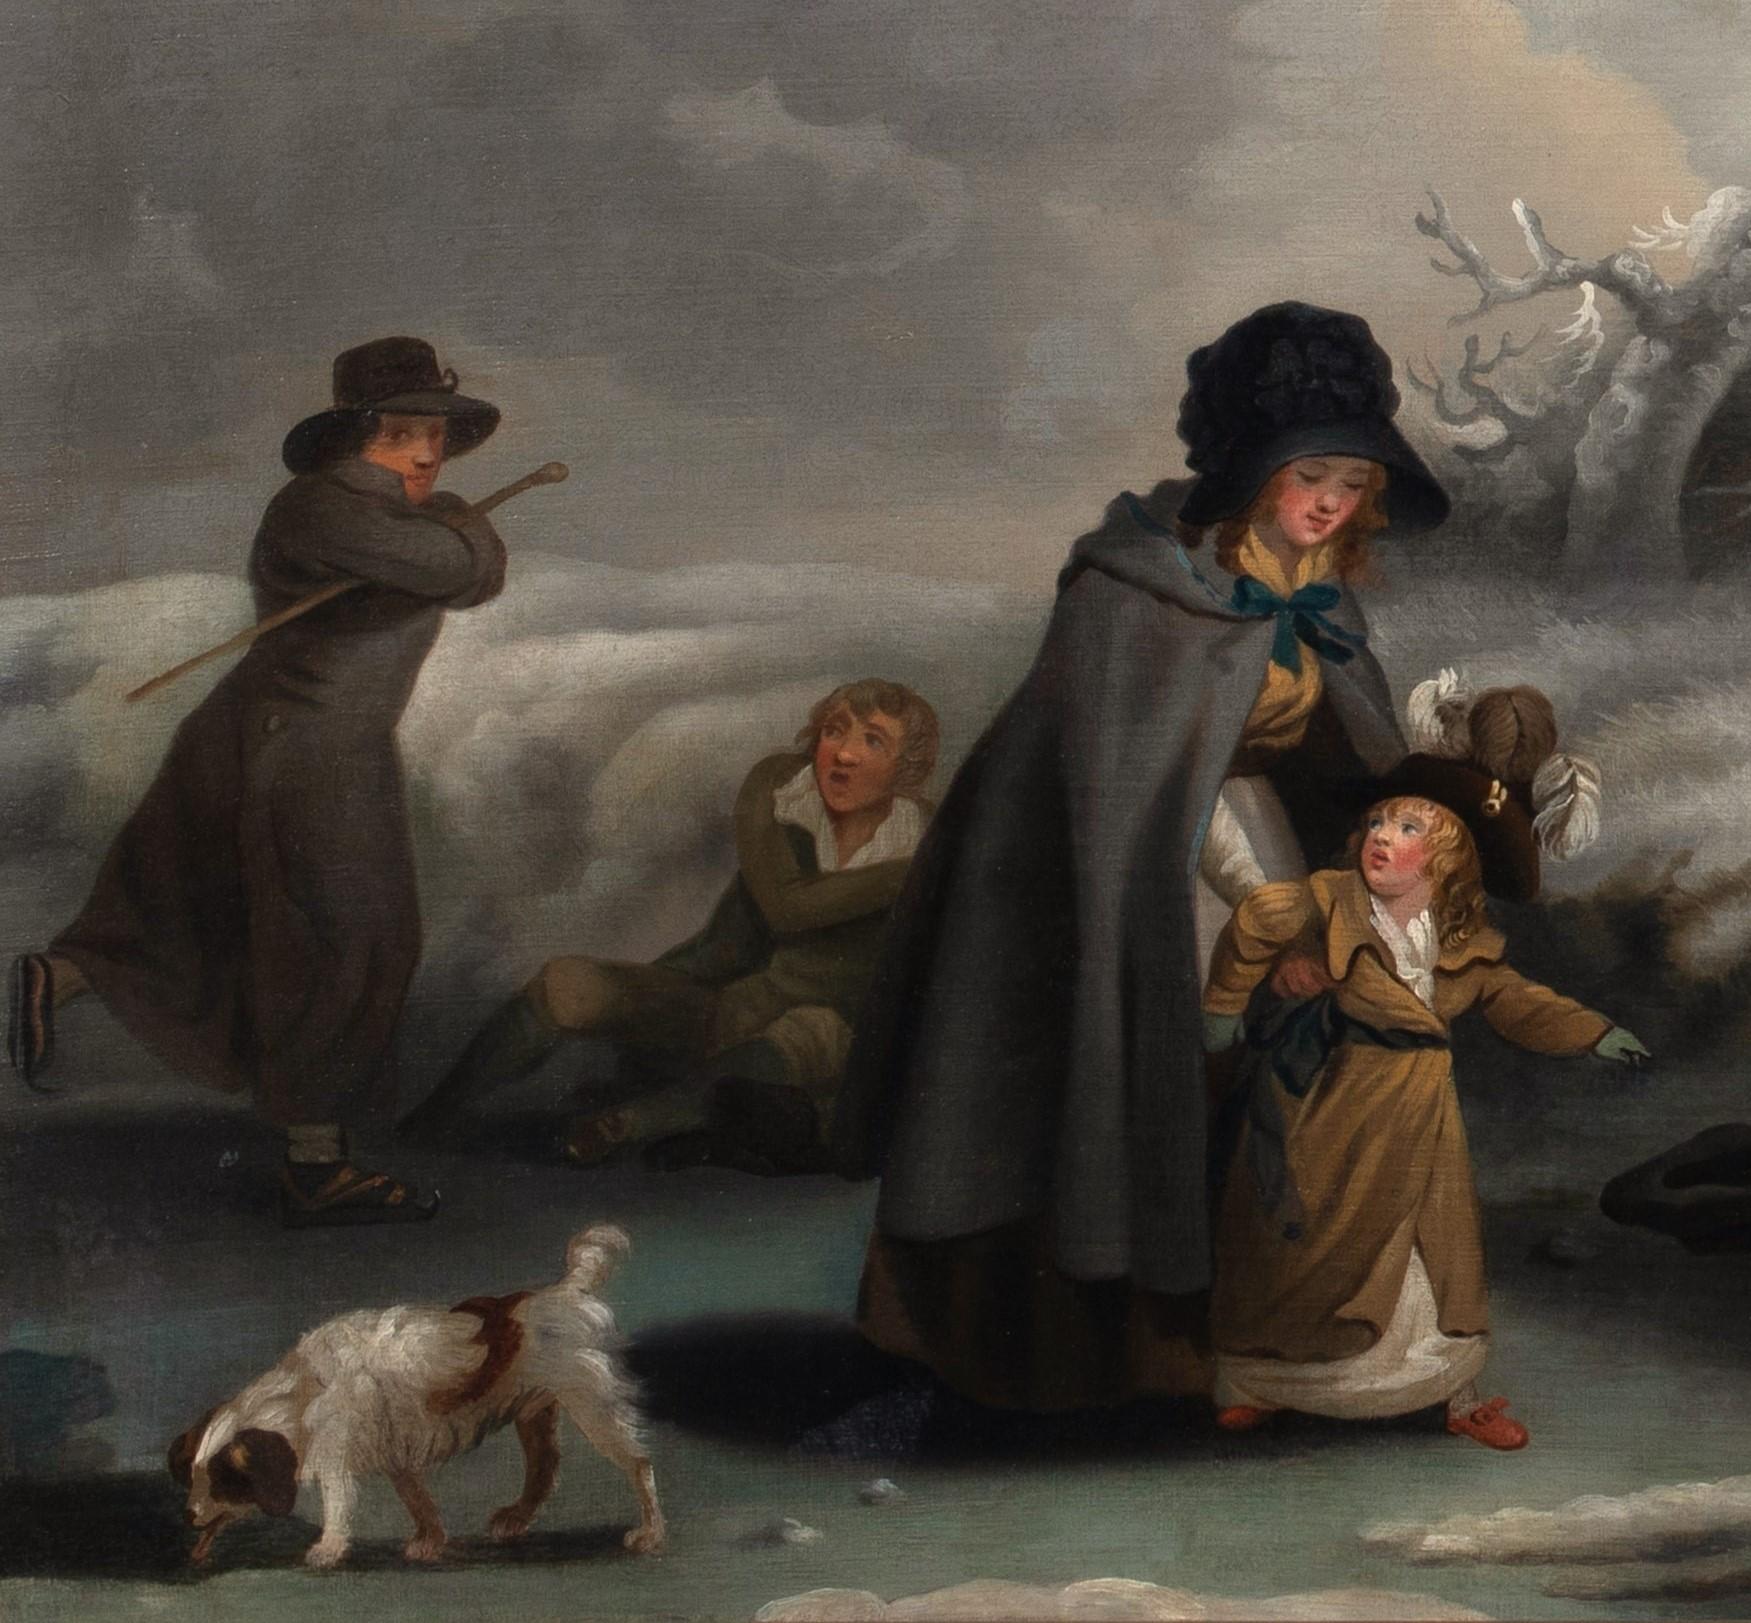 Ice Skating In A Winter Landscape, 18th Century   2